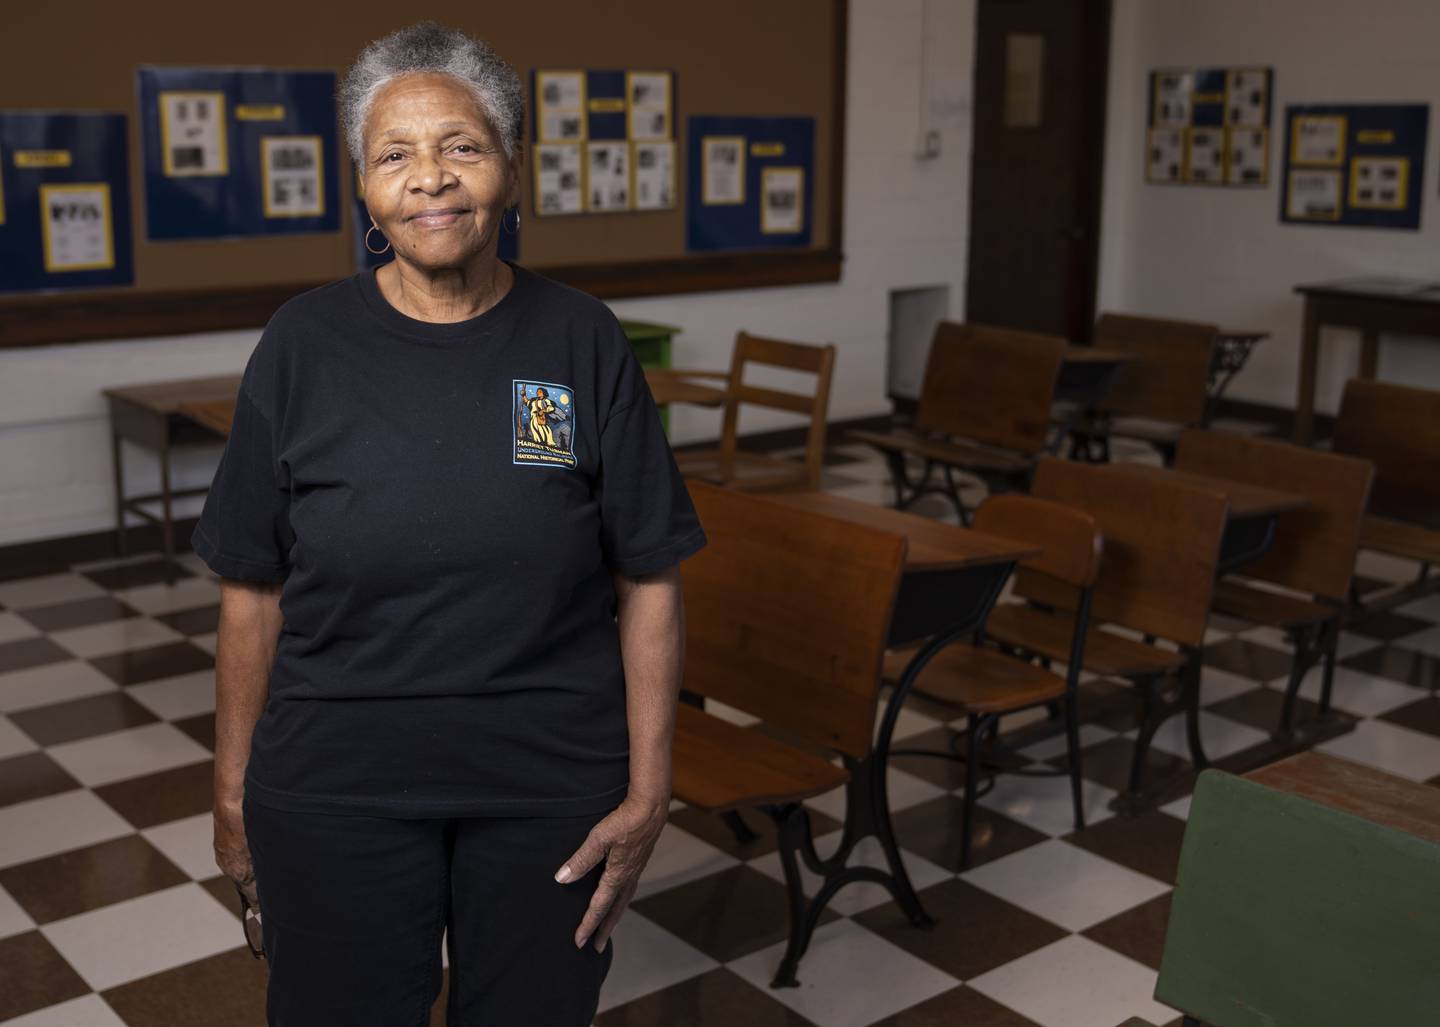 Harriet Tubman Foundation President, Bessie Bordenave, and a 1962 graduate of the Harriet Tubman School, poses for a portrait inside of the Bernice Beaird Recreated Classroom at the Harriet Tubman Cultural Center, Tuesday, February 21, 2023.